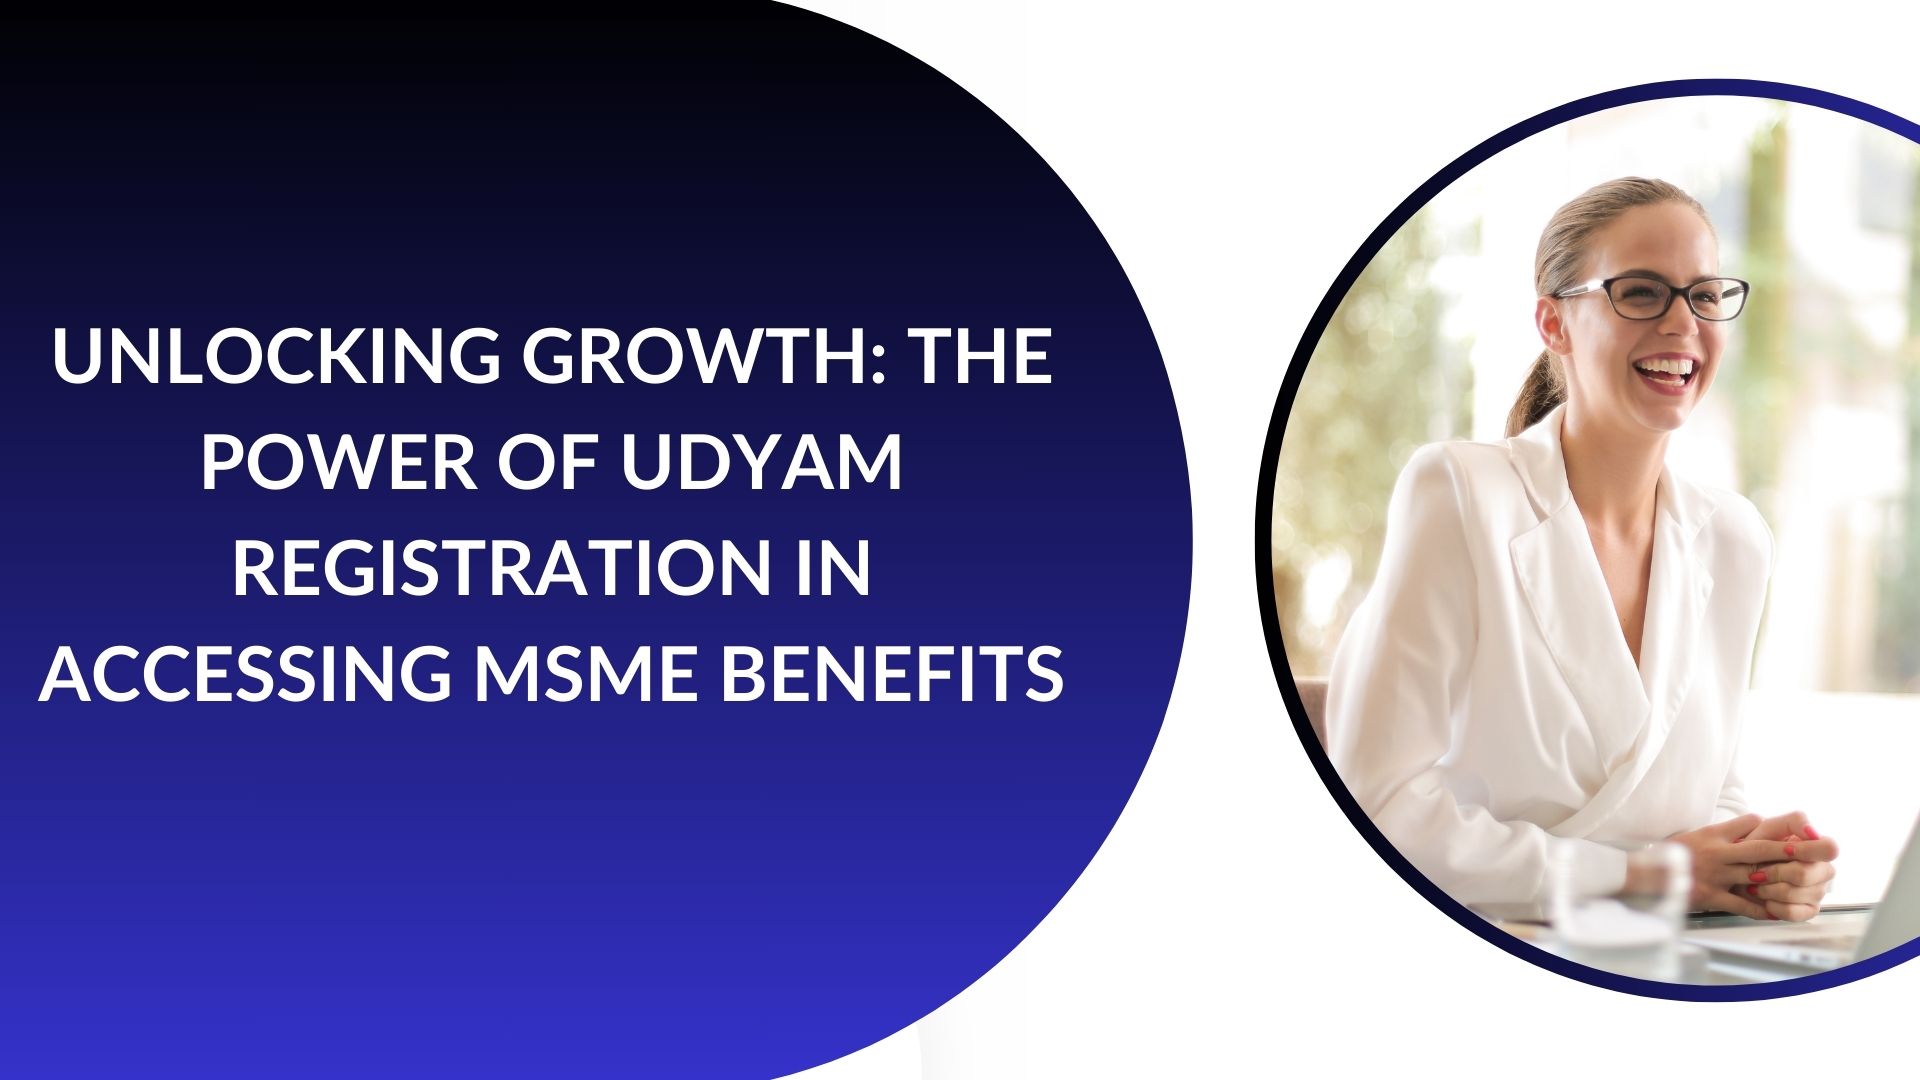 Unlocking Growth: The Power of Udyam Registration in Accessing MSME Benefits